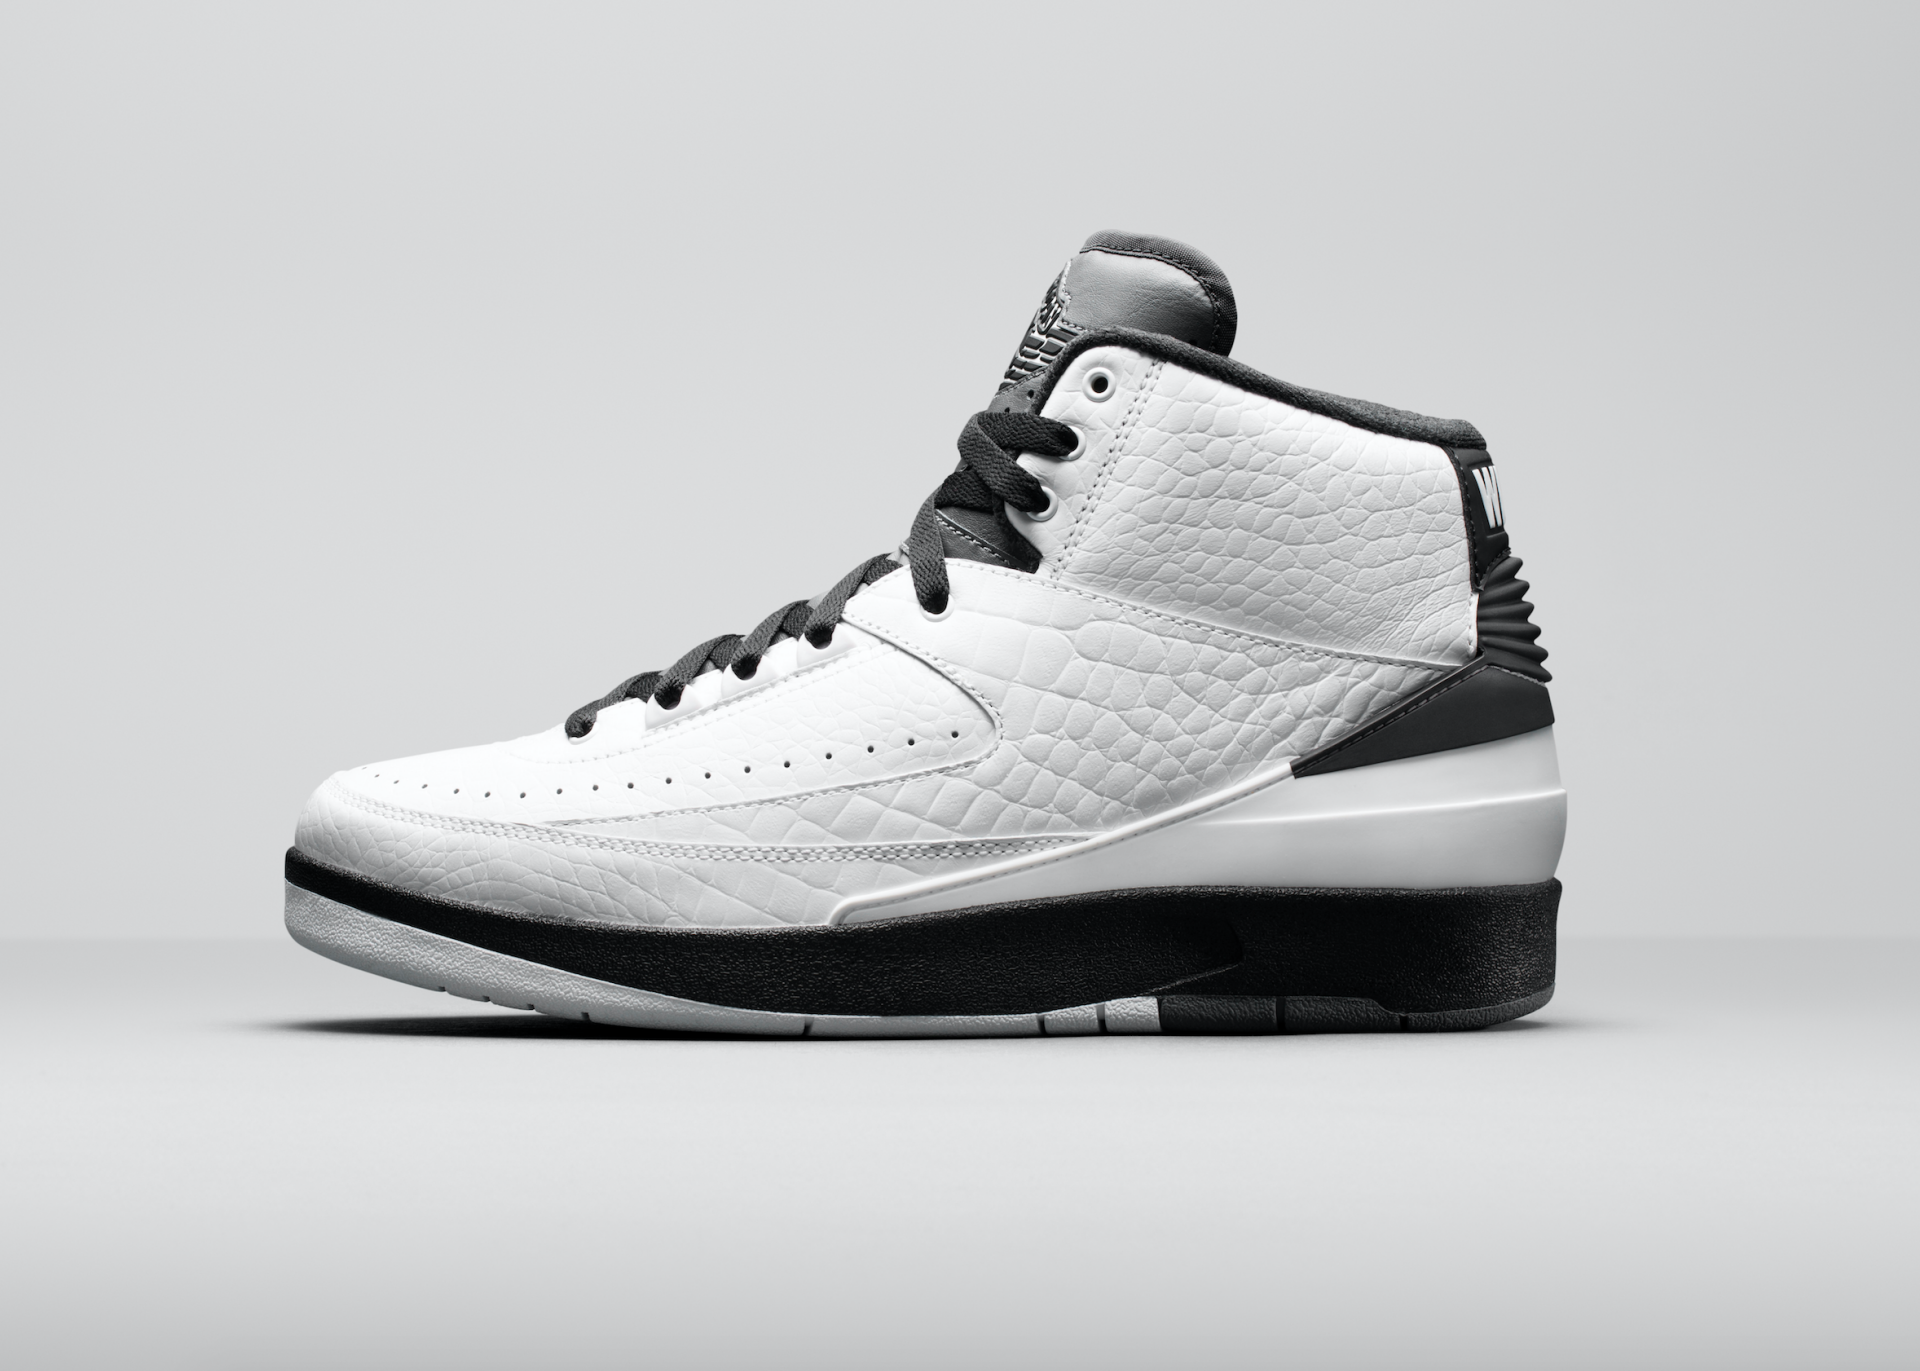 HD desktop wallpaper featuring a white and black Air Jordan shoe against a grey background.